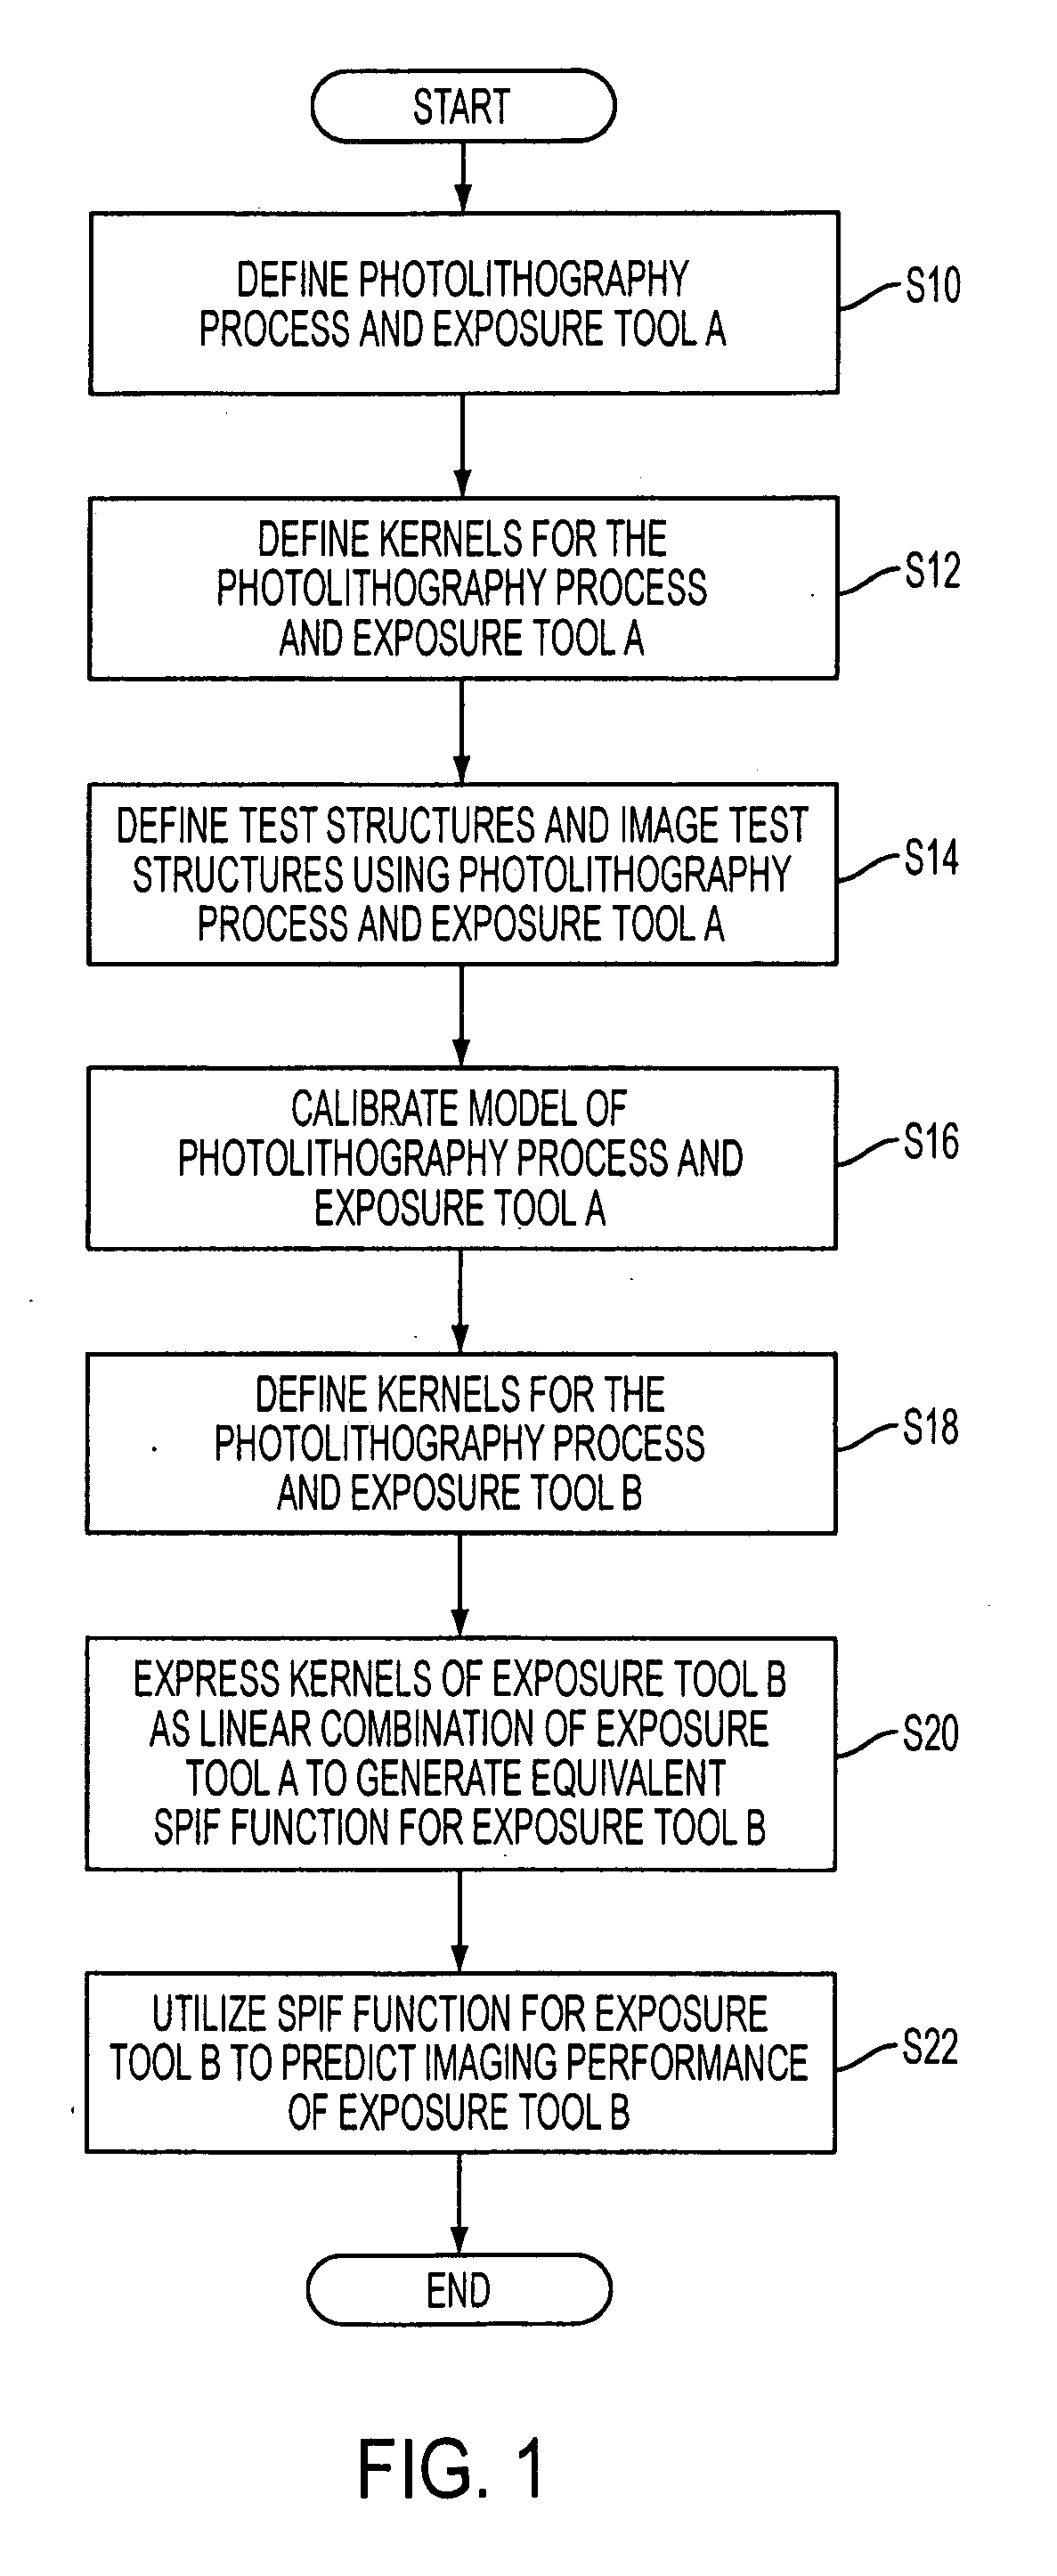 Method of predicting and minimizing model OPC deviation due to mix/match of exposure tools using a calibrated eigen decomposition model